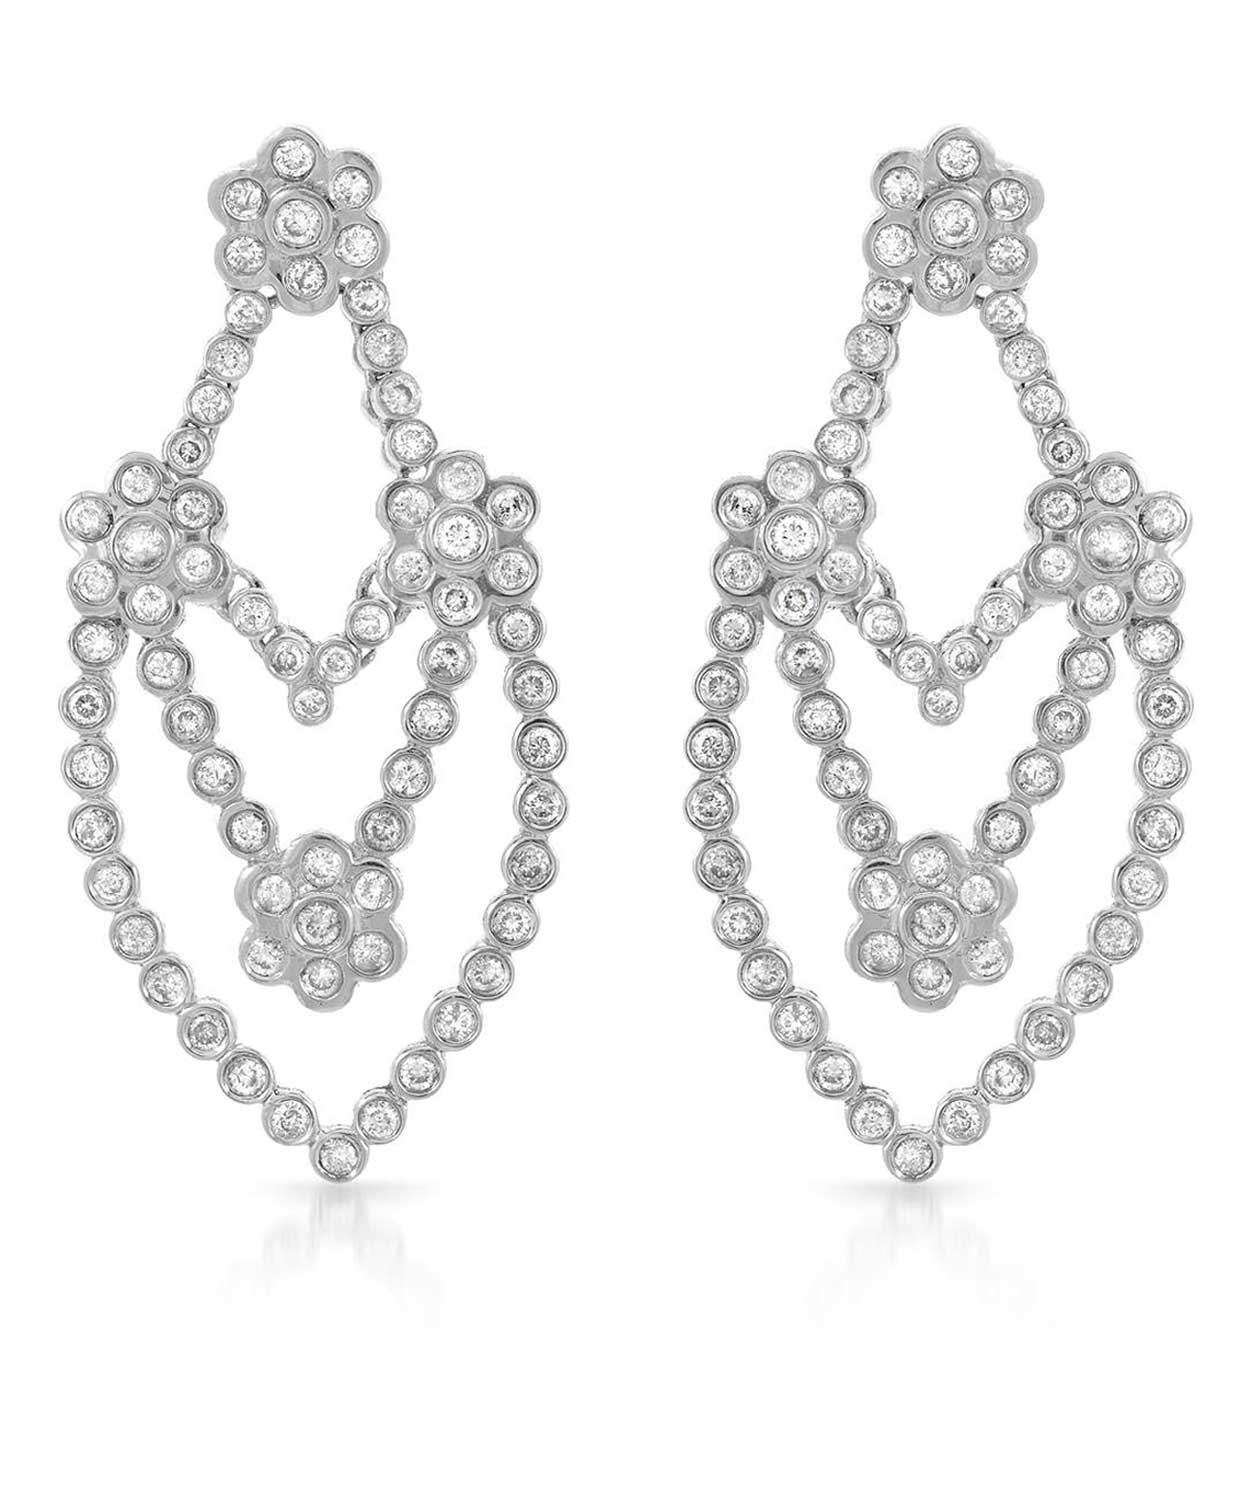 Allure Collection 2.09 ctw Diamond 14k White Gold Flower Chandelier Earrings View 1